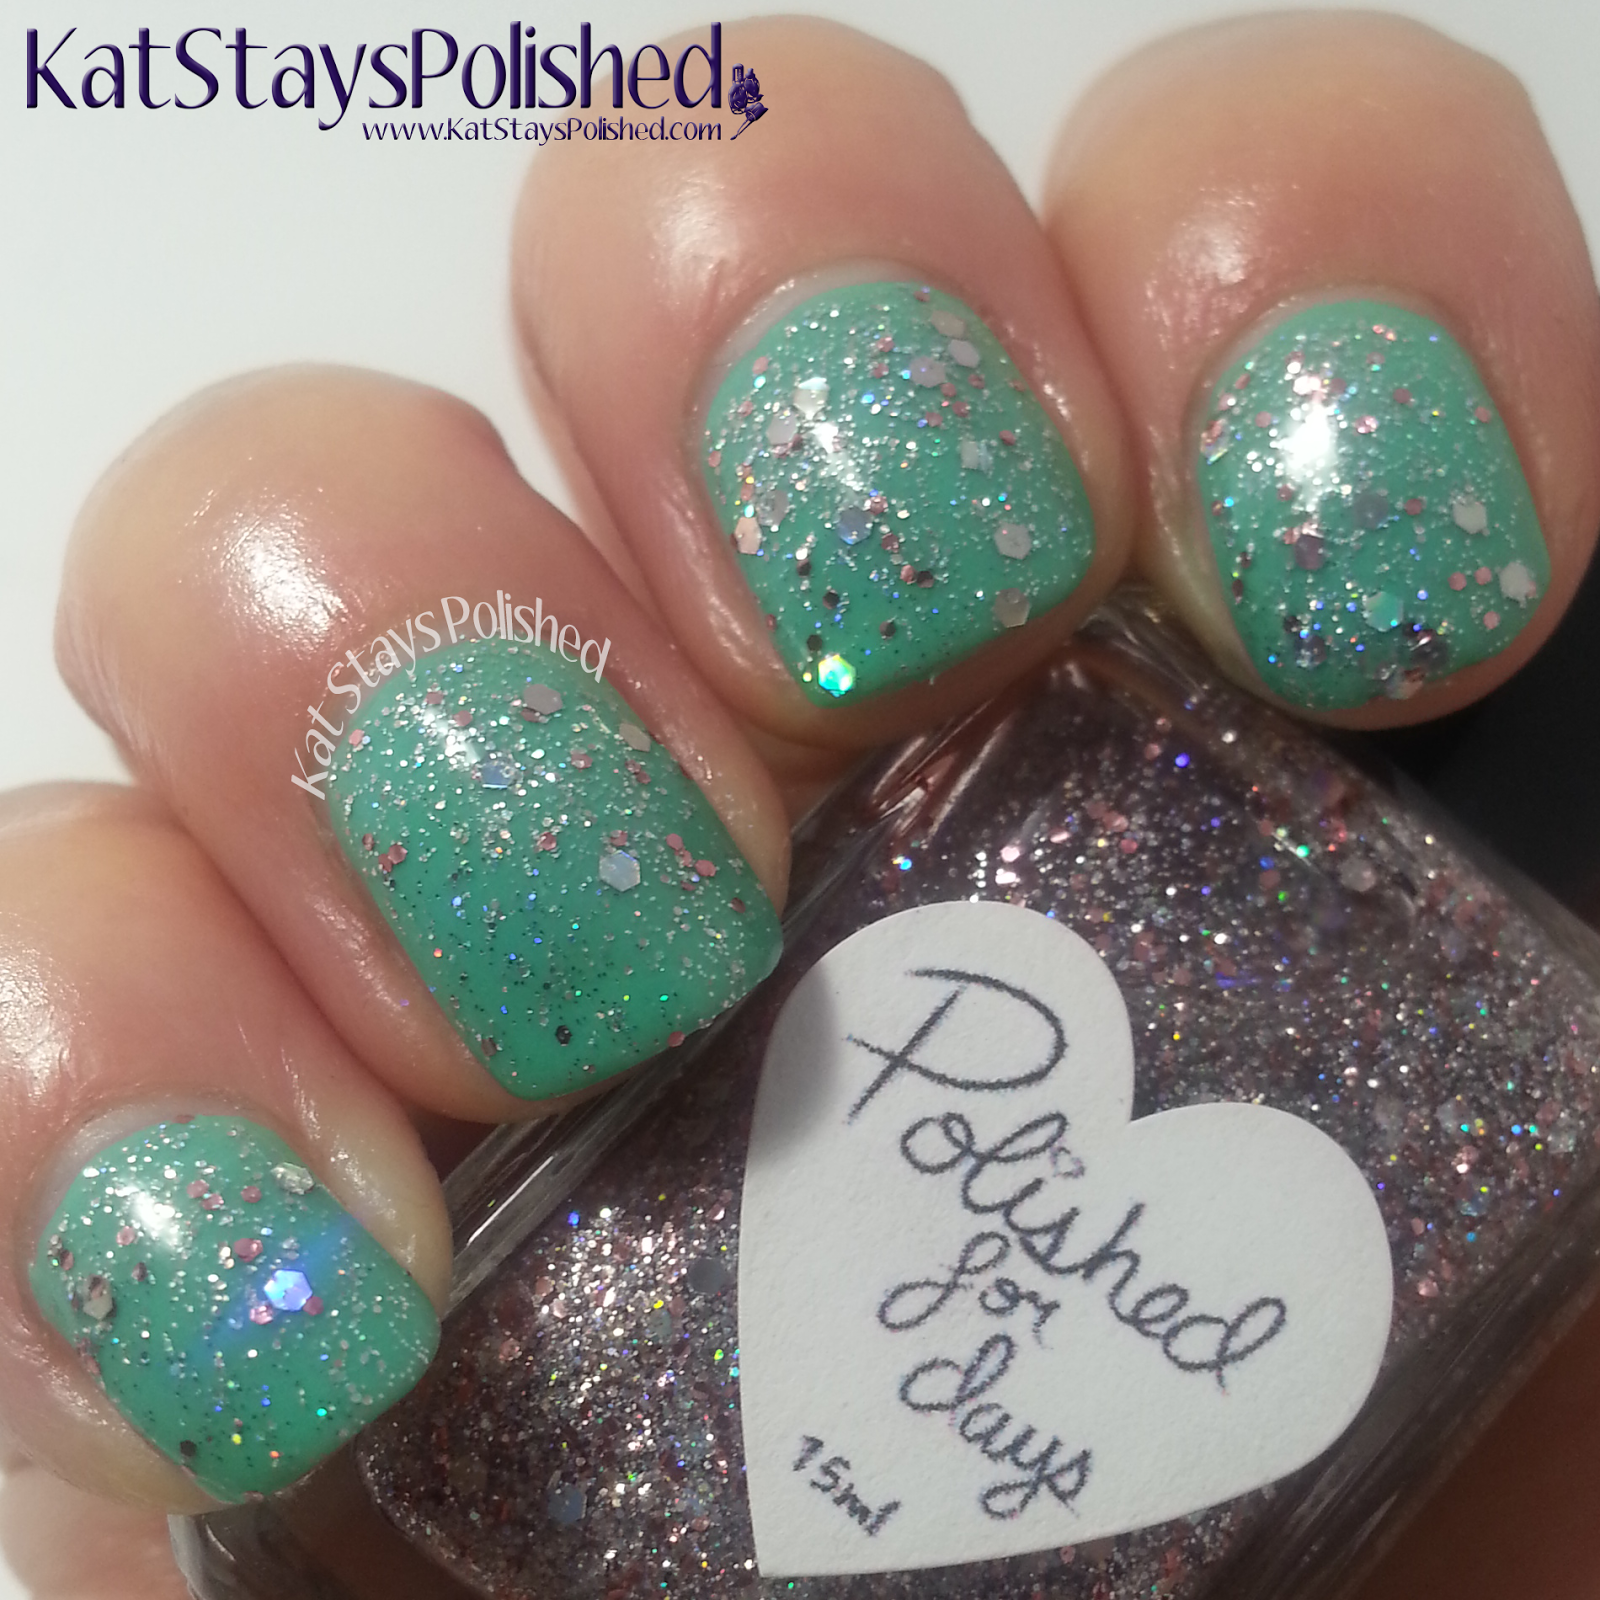 Polished for For Days - Gloss48 - Dream Come True | Kat Stays Polished